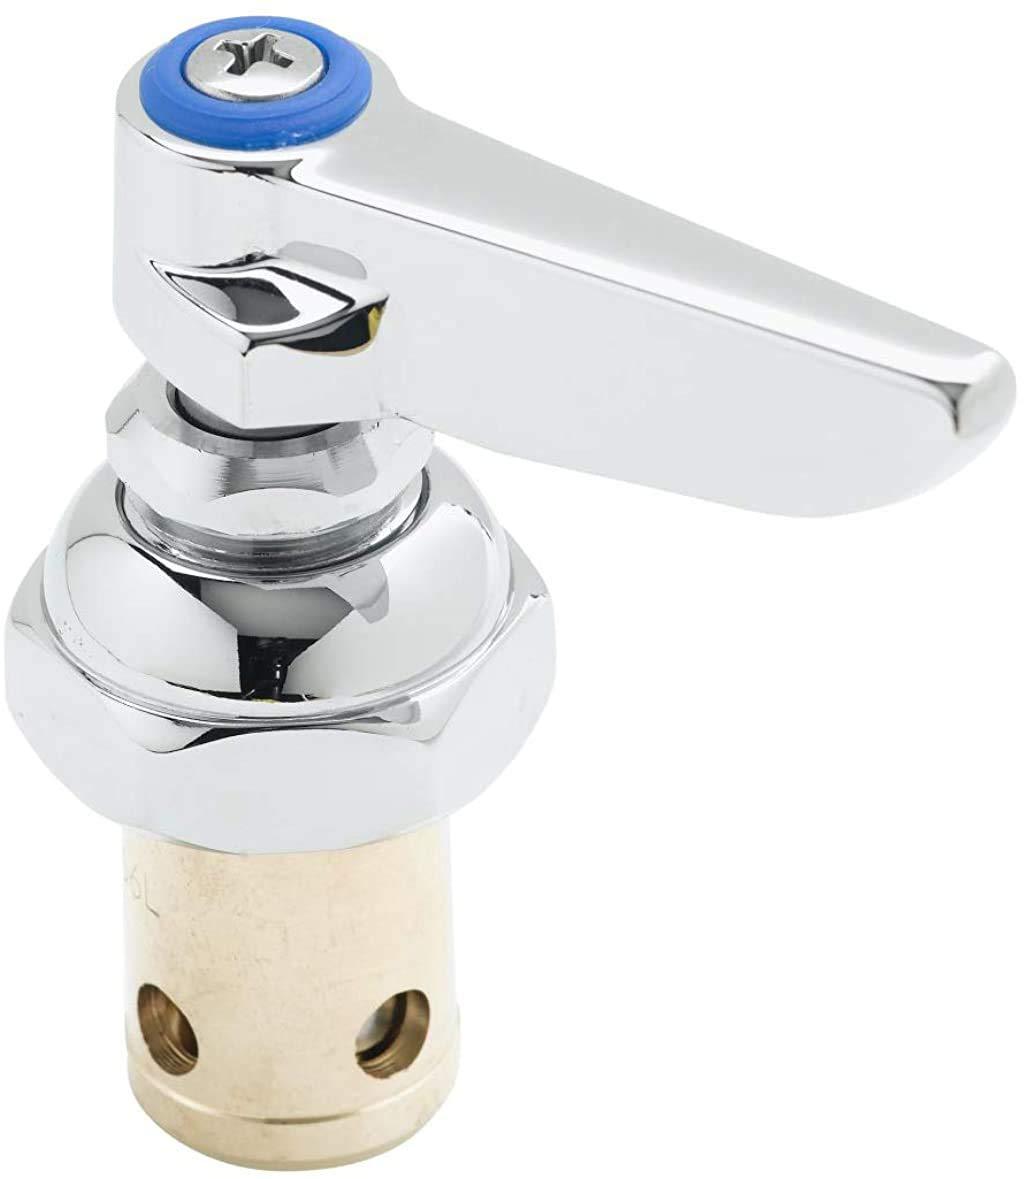 T&S Brass 002713-40 Spindle Assembly for Eterna Valve Replacement. Cold Side Handle Stem Assembly Replacement Fits all T&S Faucets. - NewNest Australia